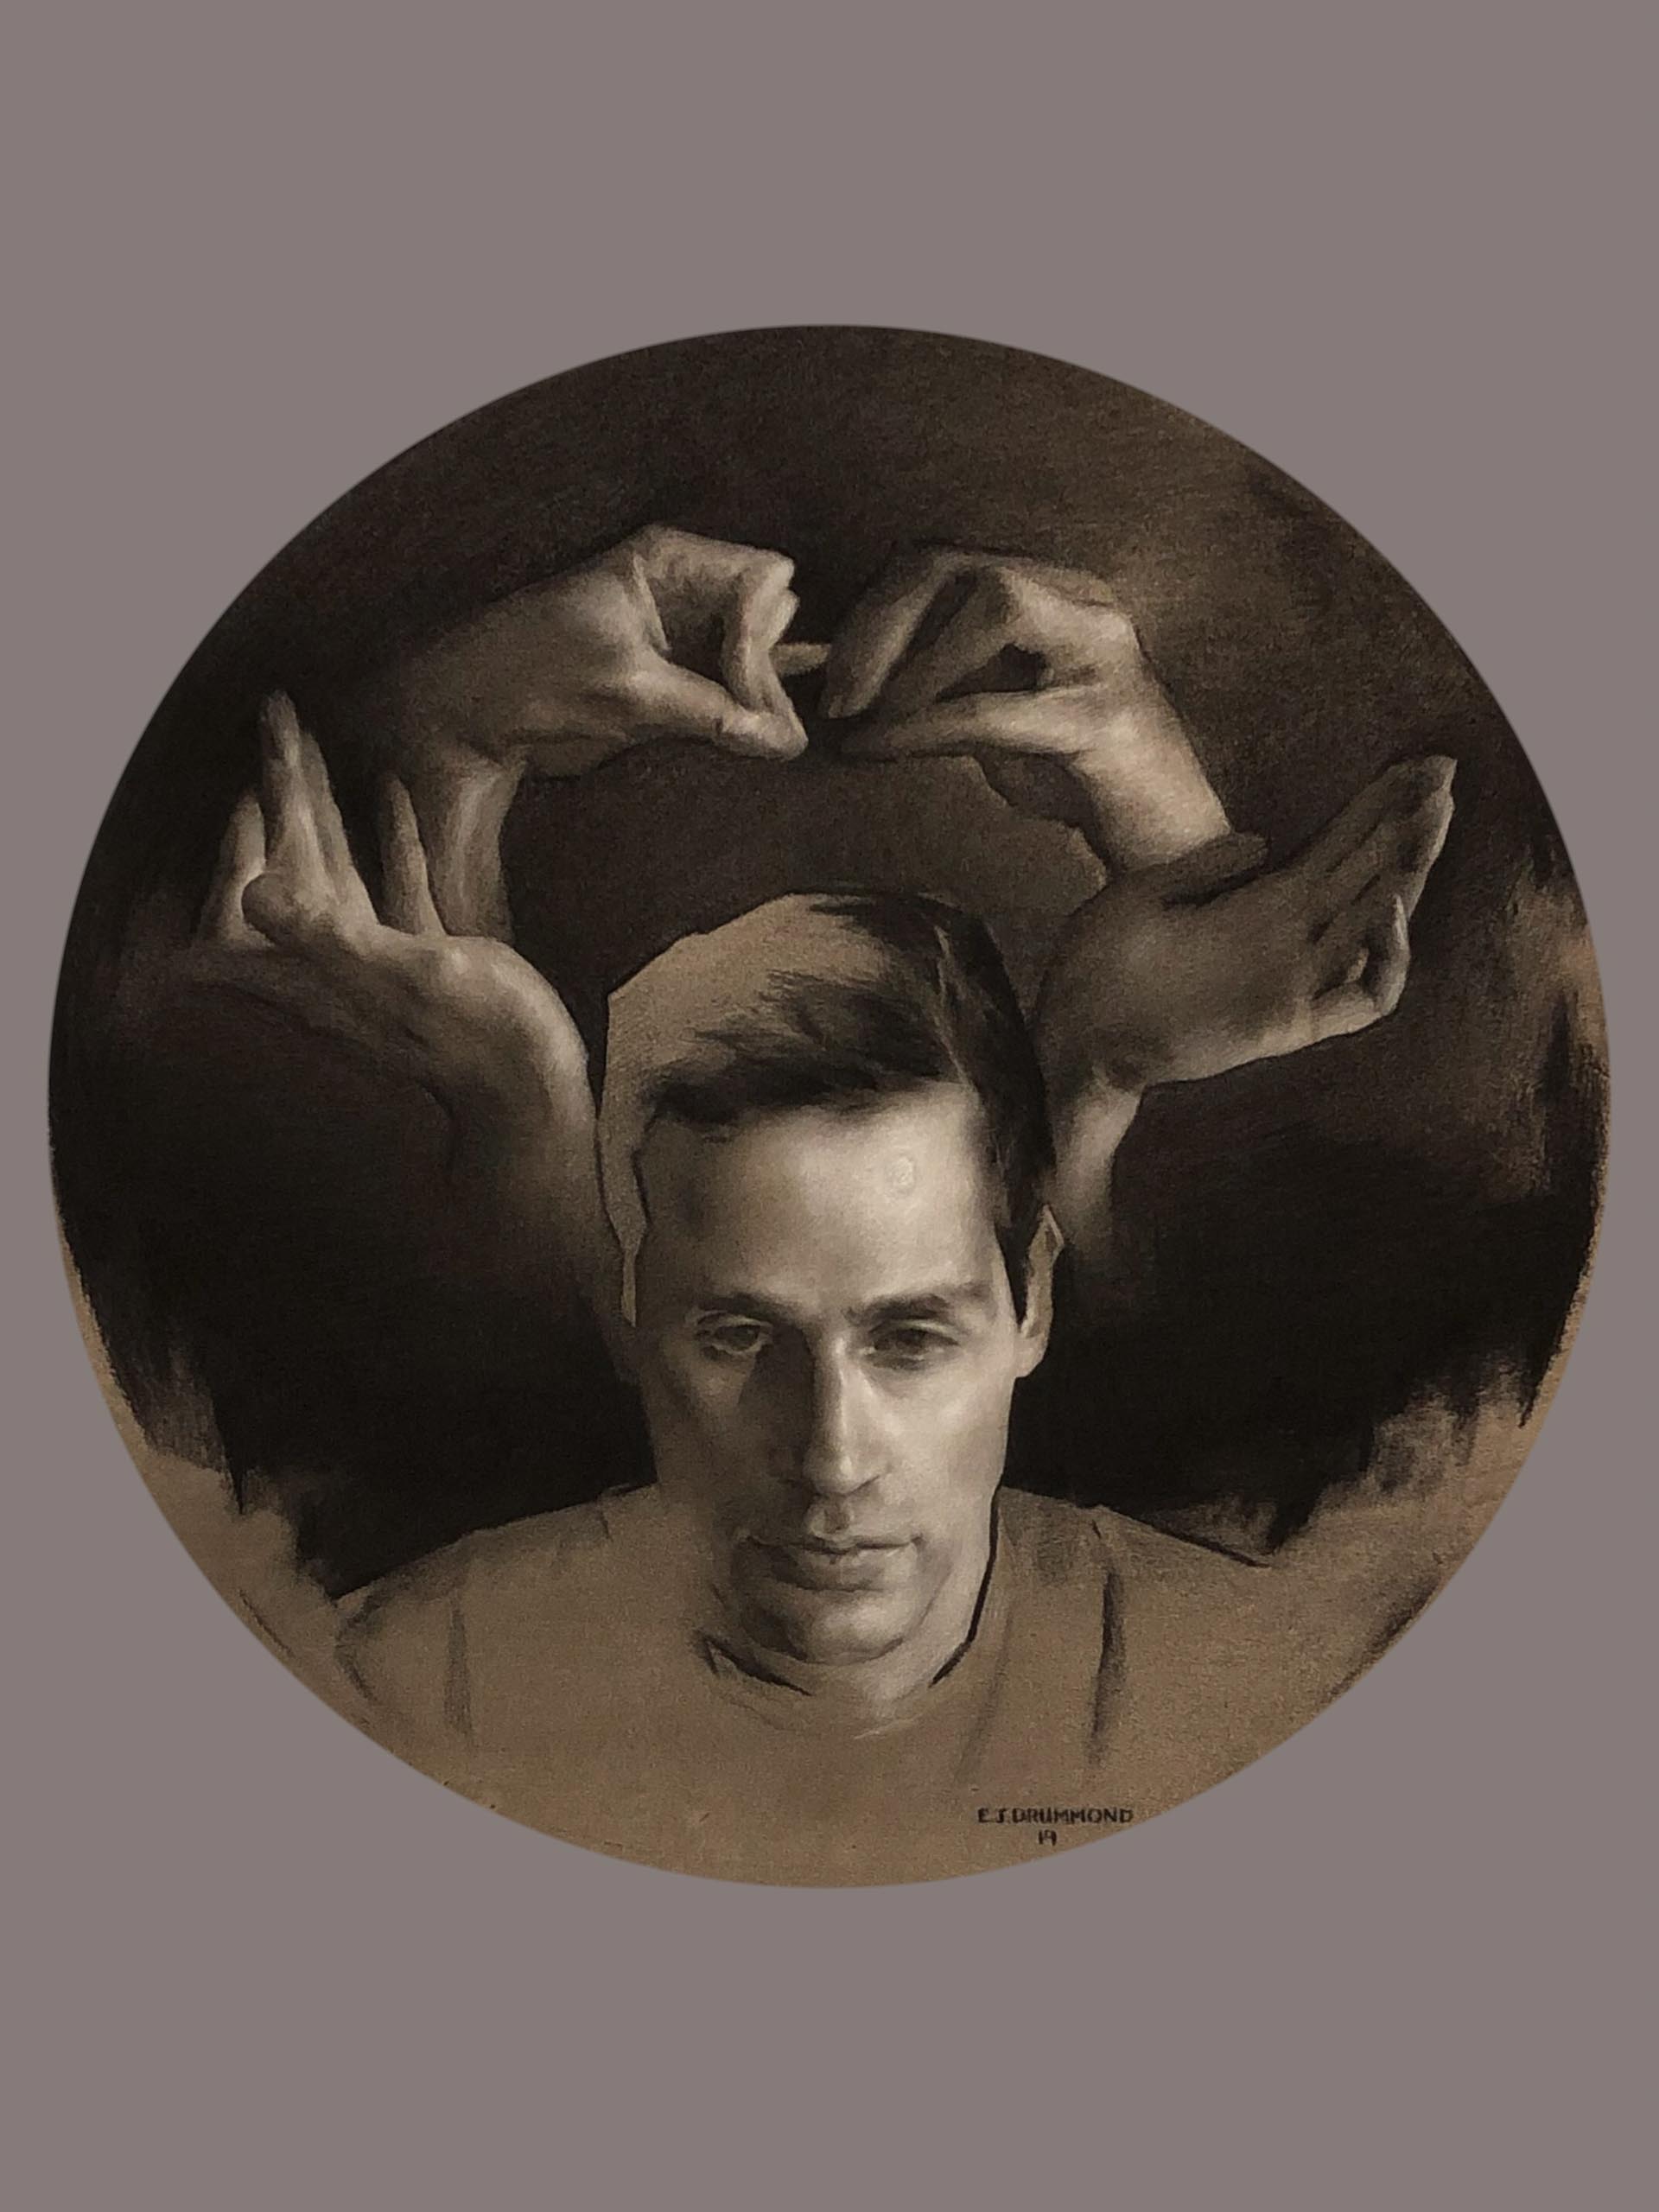 Eric J. Drummond, Puzzle, Charcoal and white chalk on toned Strathmore paper, 80 x 80 cm, 2019.